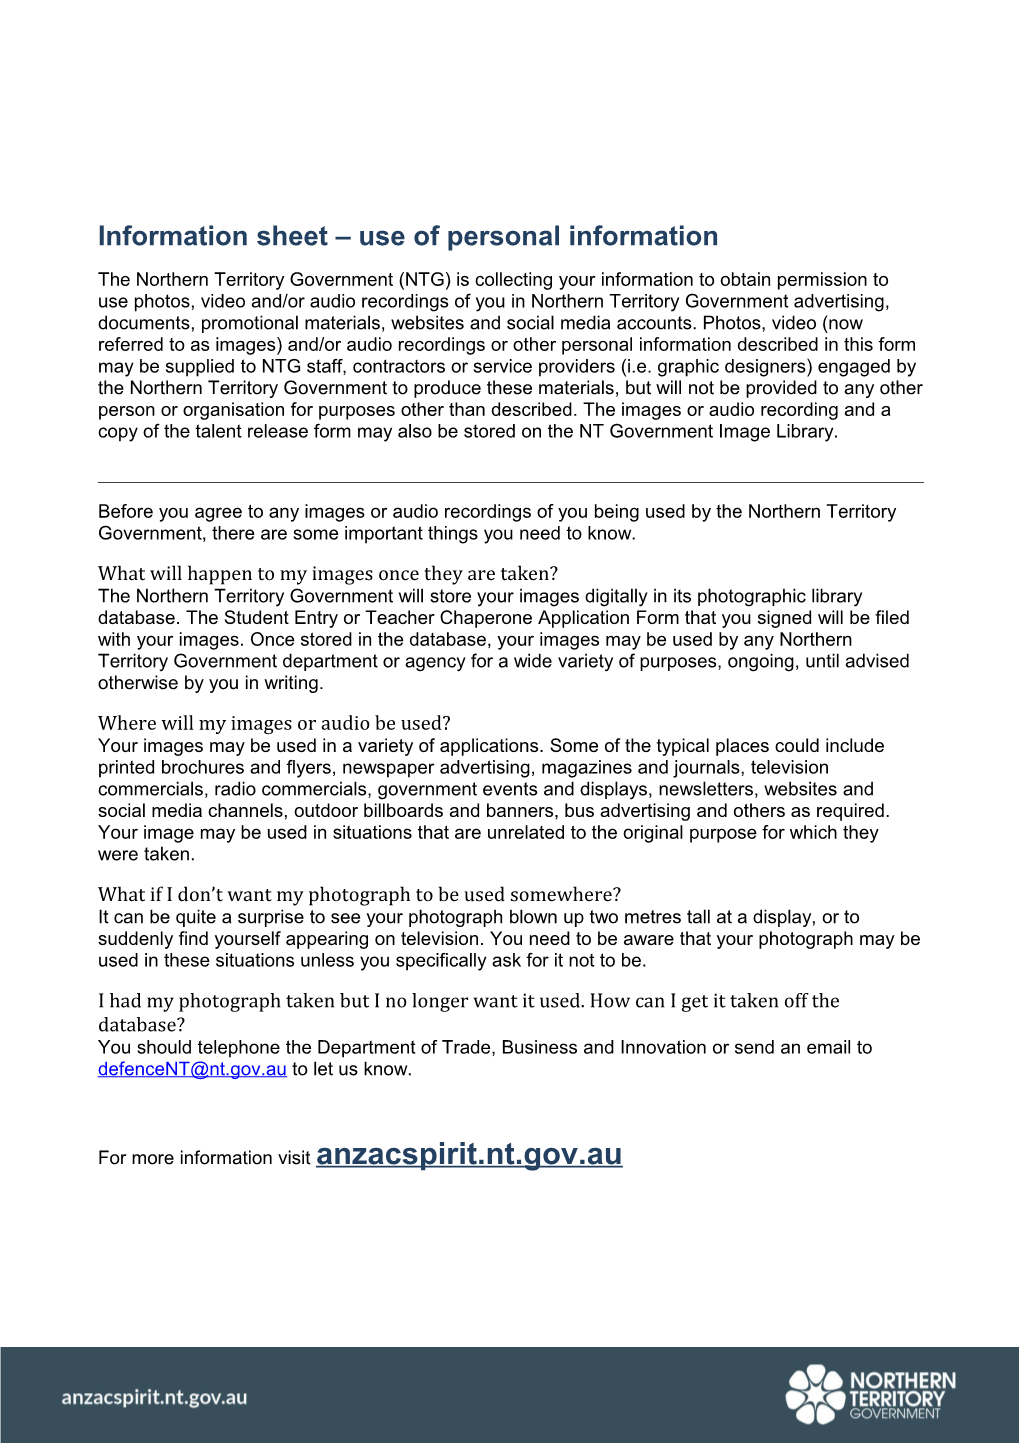 Anzac Spirit Study Tour Information Sheet - Use of Personal Information